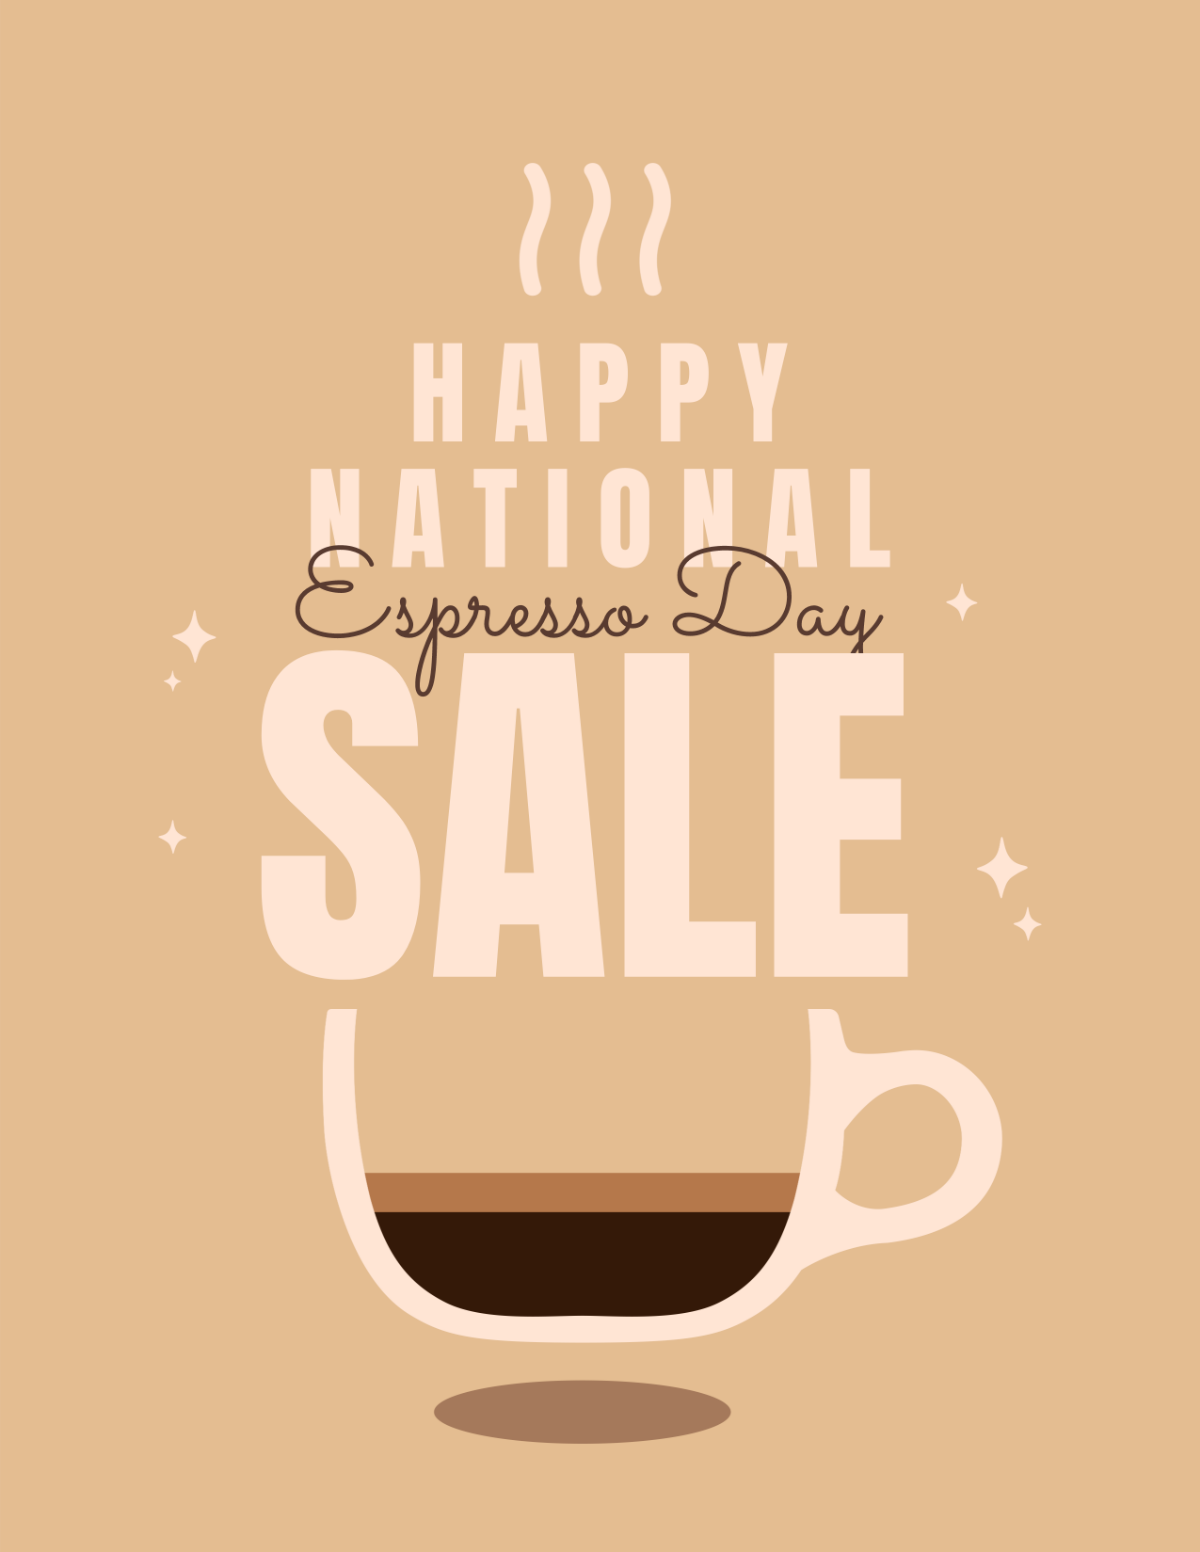 Free National Espresso Day Sales Flyer Template